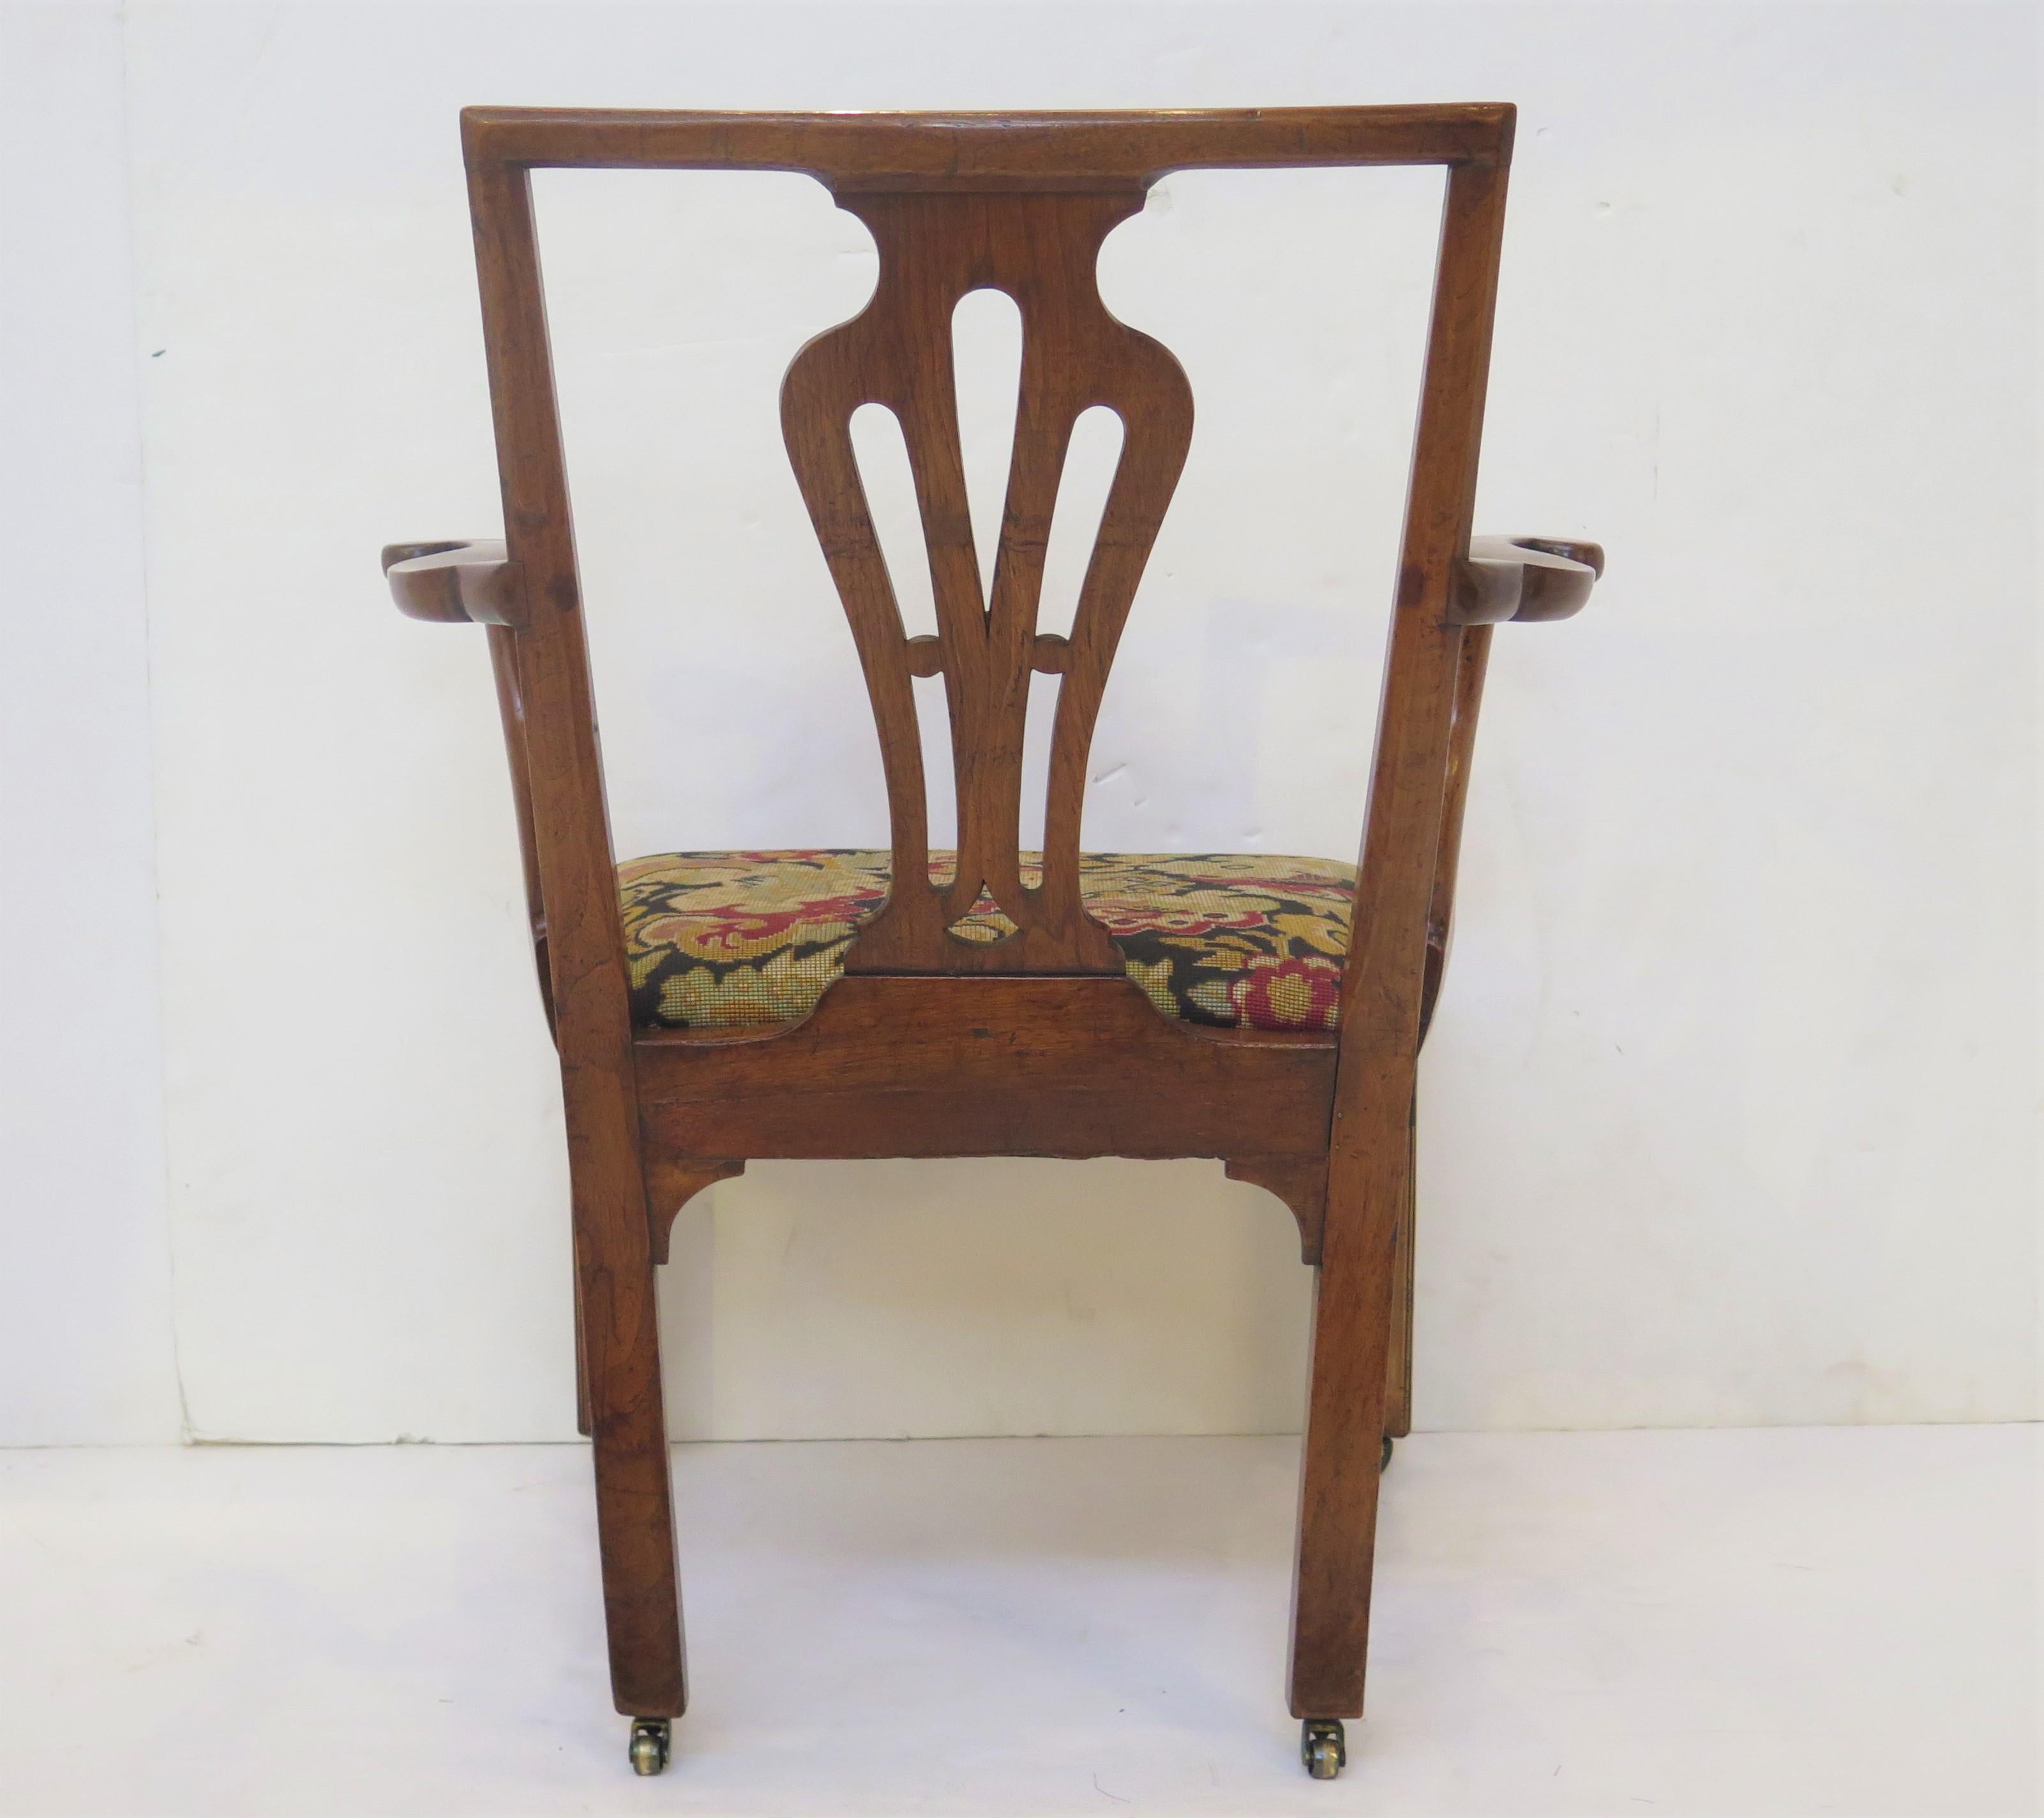 Handsome Georgian Armchair / Desk Chair of Walnut with Needlework Seat In Good Condition For Sale In Dallas, TX